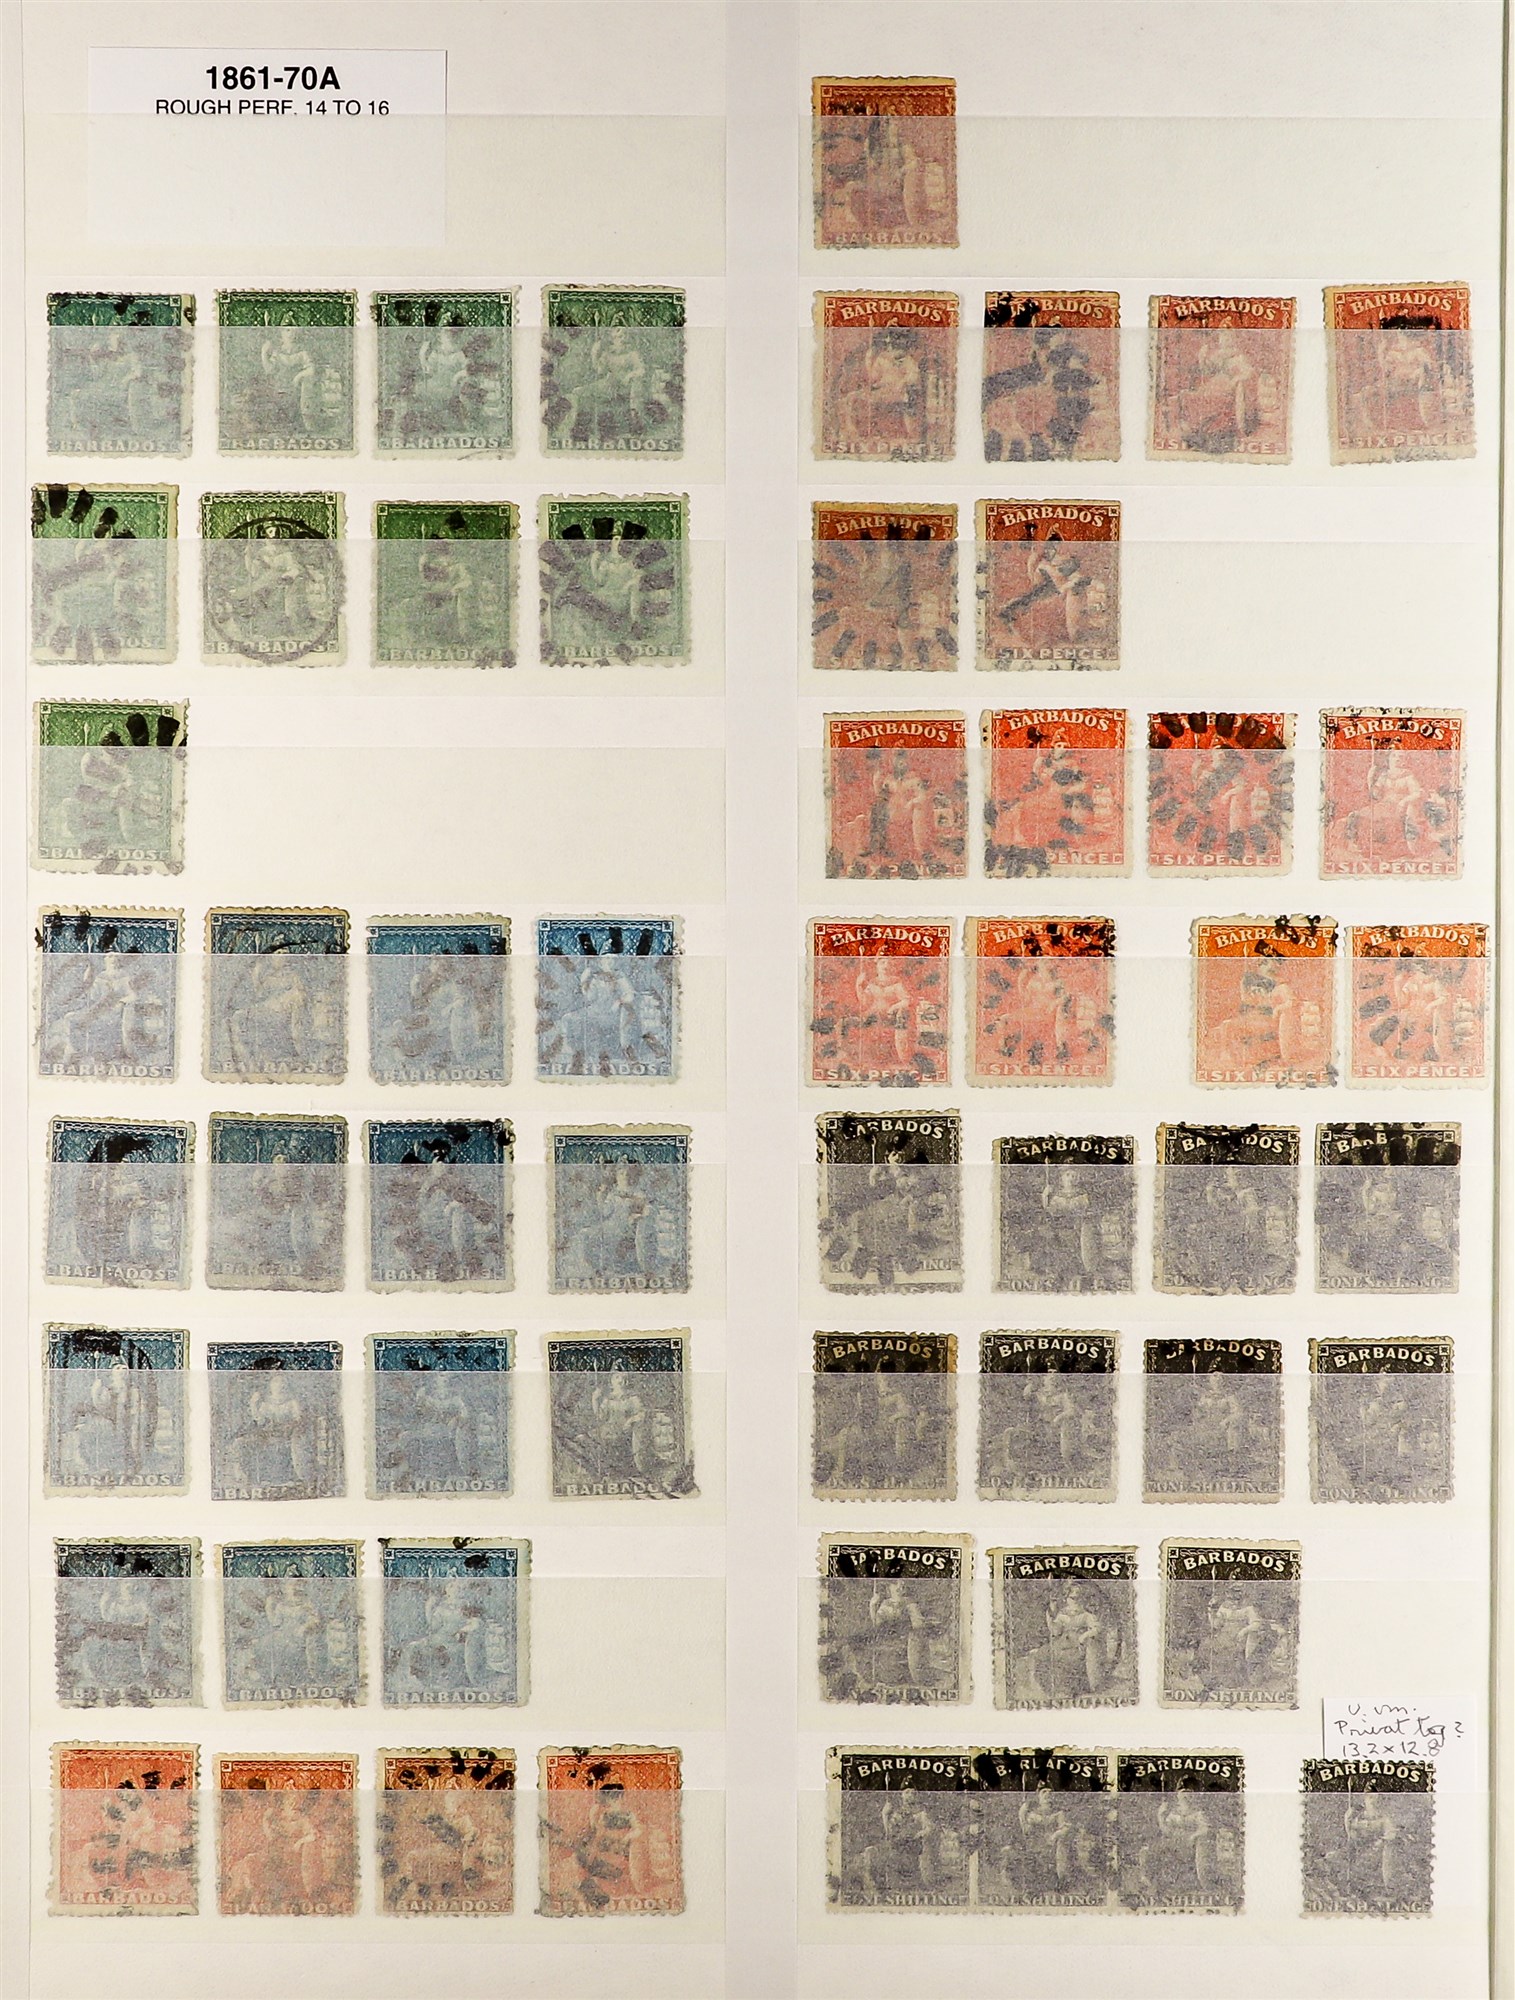 BARBADOS 1852 - 1875 BRITANNIAS COLLECTION of around 120 used stamps annotated on protective - Image 2 of 4